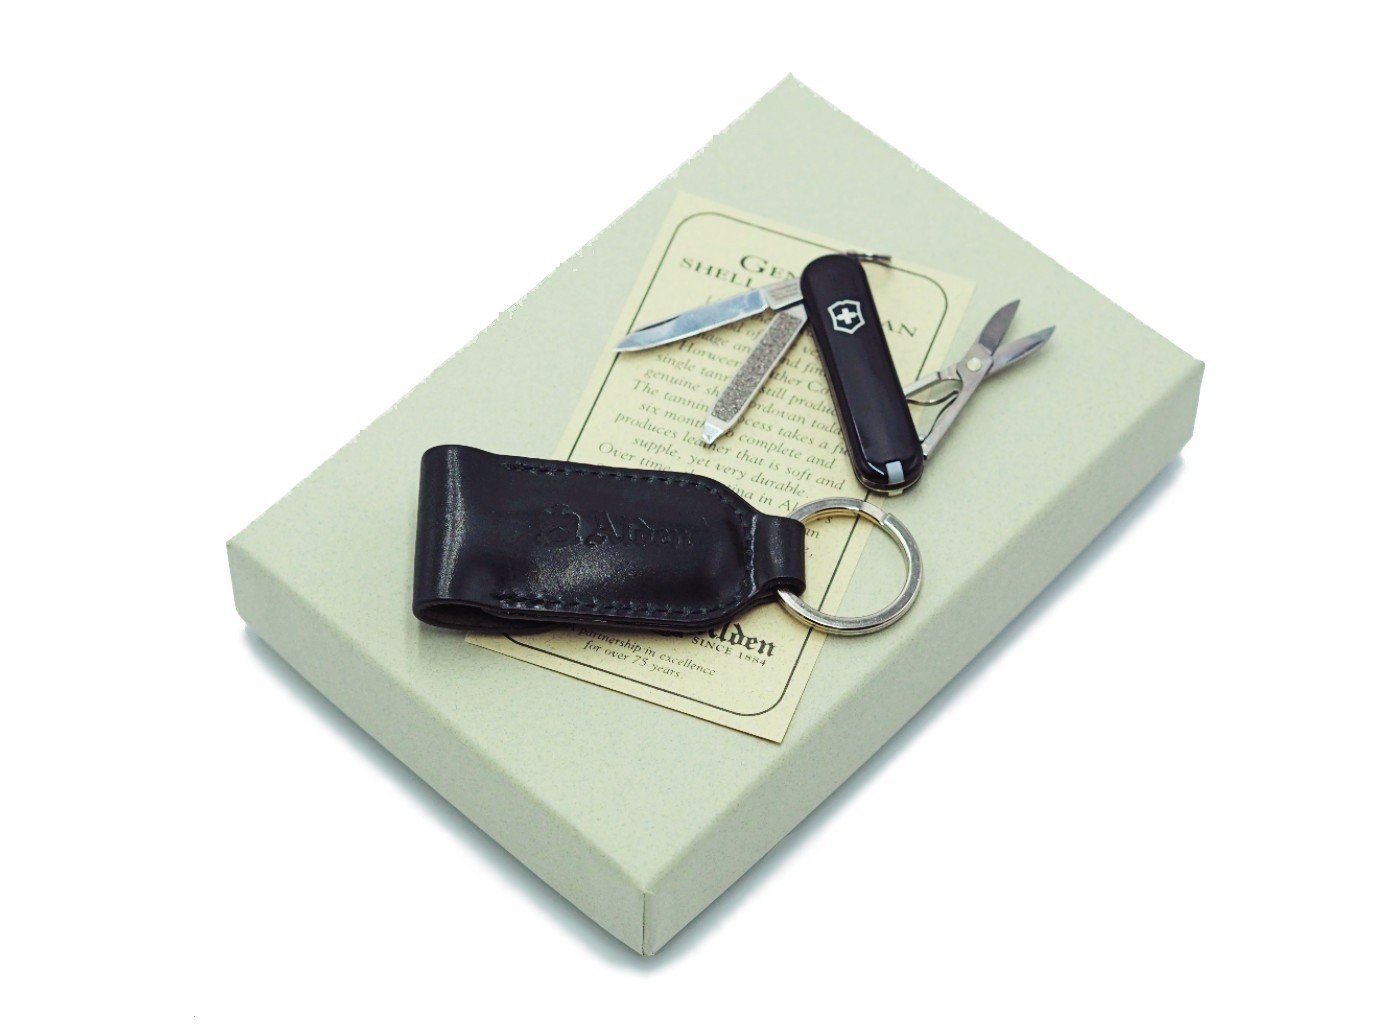 Swiss army knife and Alden black shell cordovan knife case with key ring on top of box